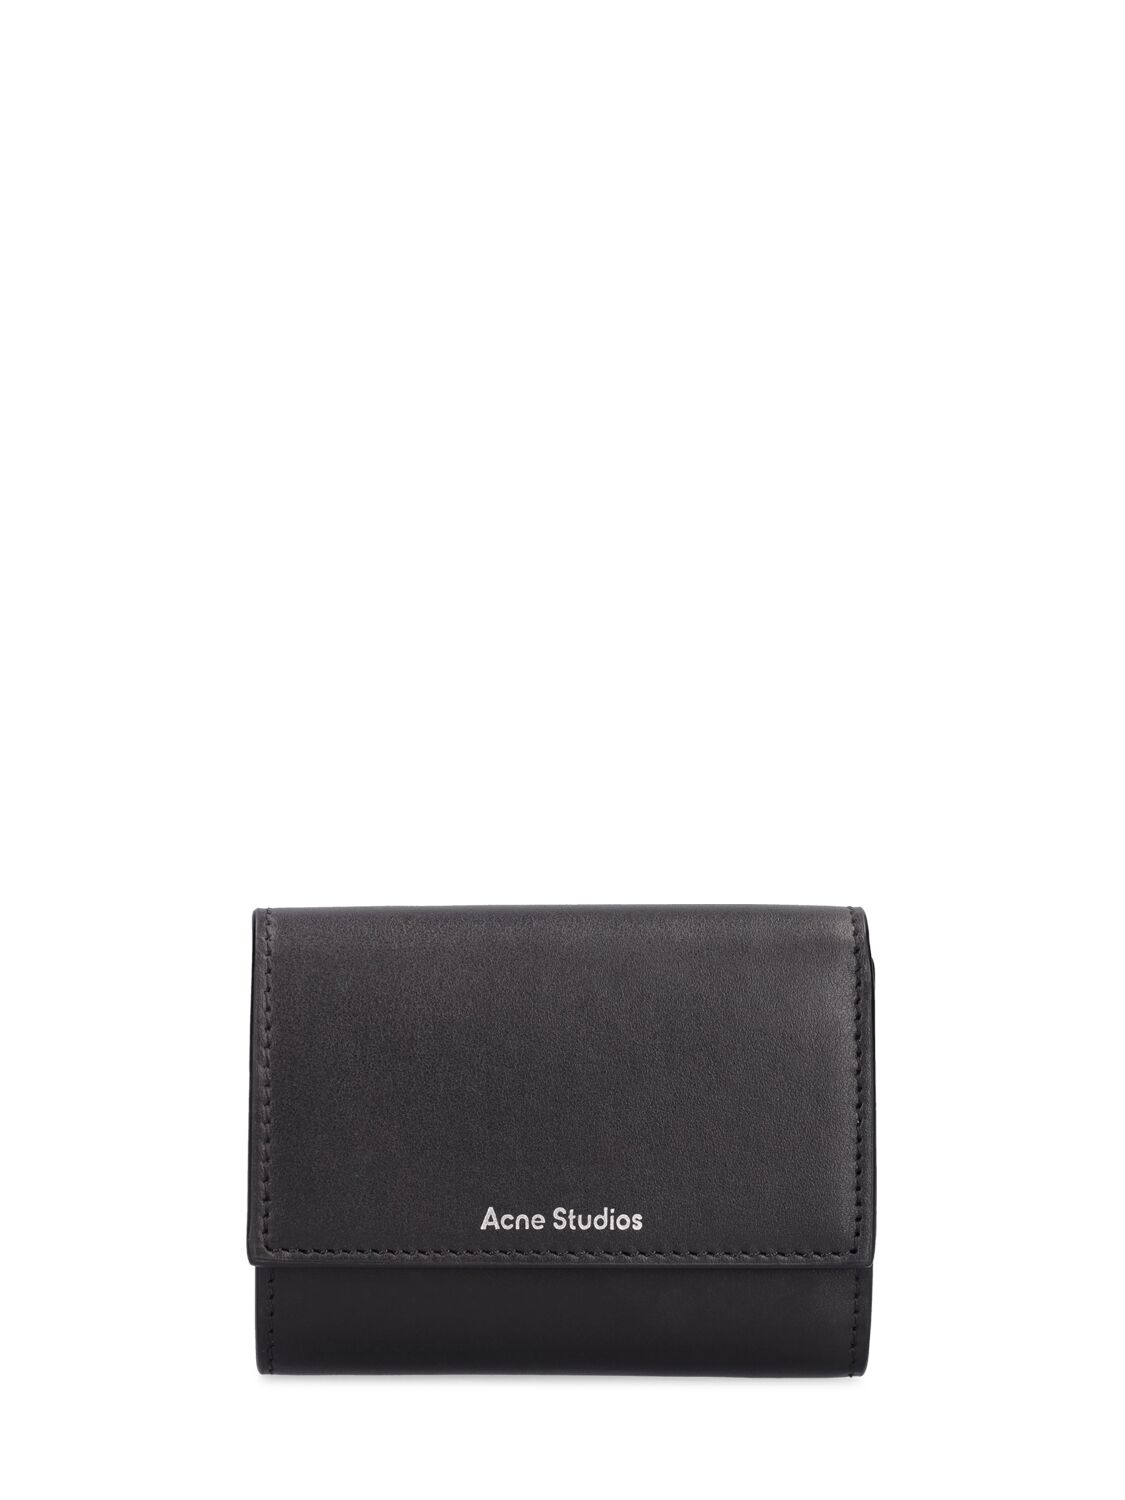 Acne Studios Leather Trifold Wallet In Black